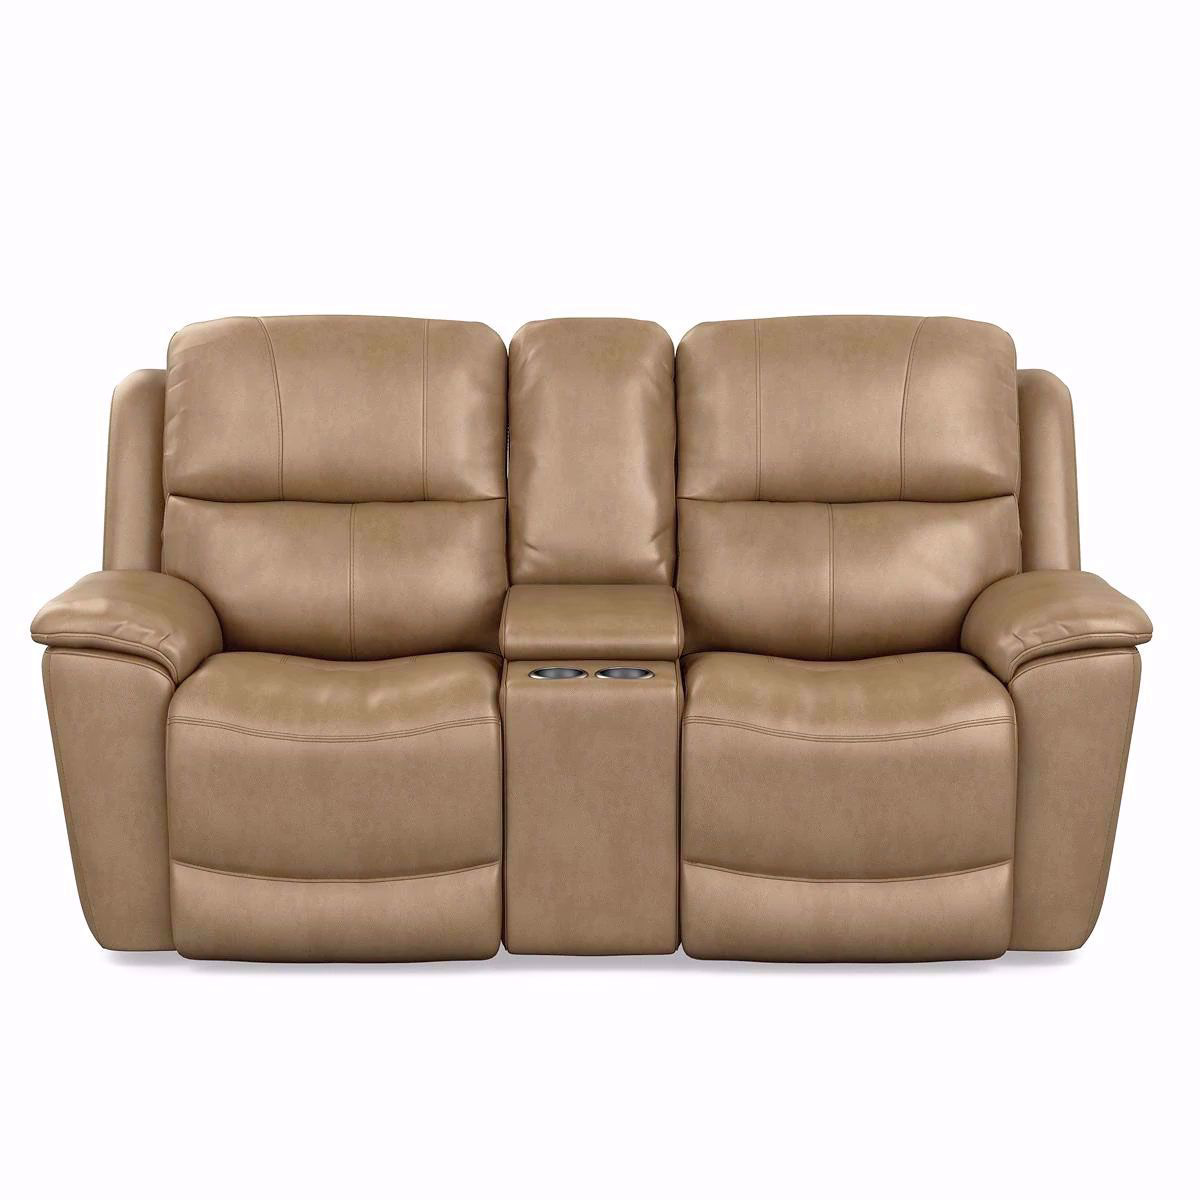 Picture of Cade Leather Power Reclining Console Loveseat